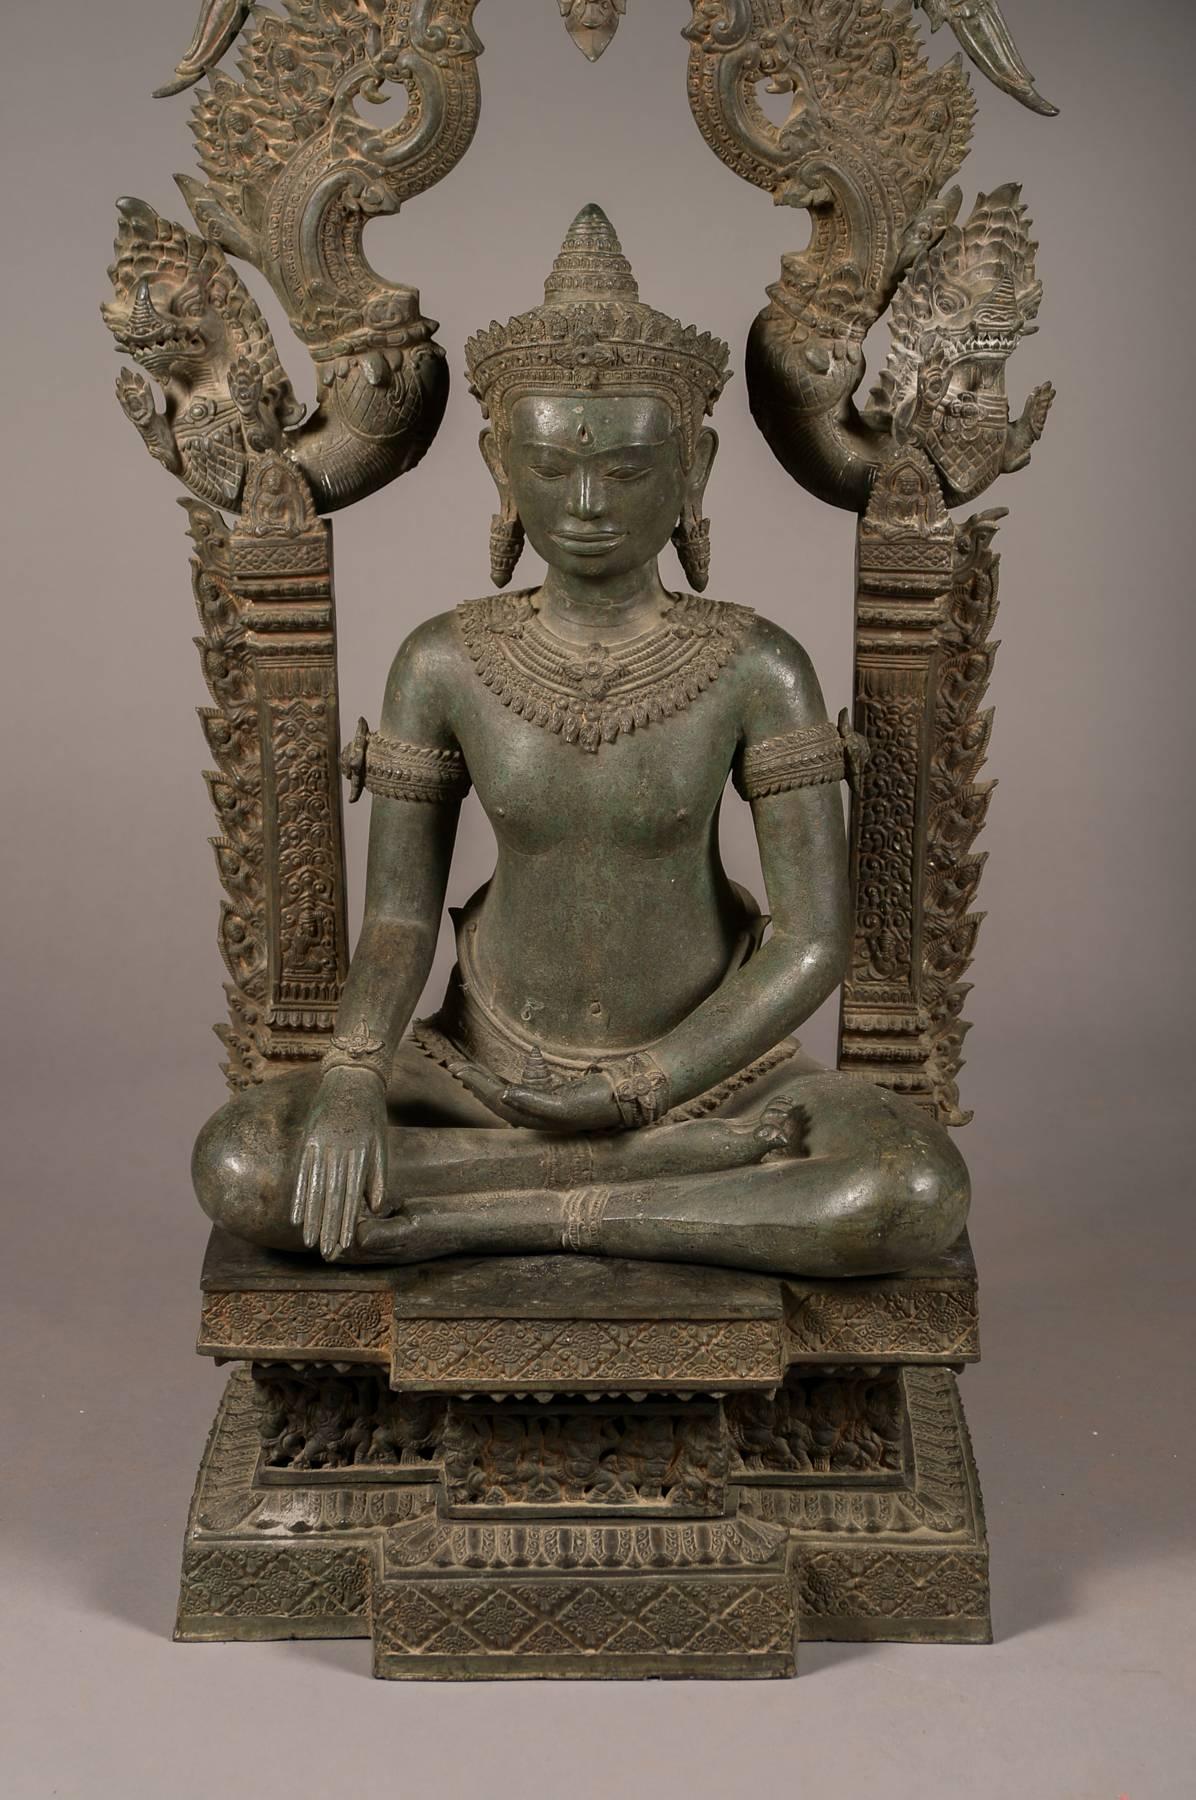 Large old Cambodian bronze temple Buddha. Having very detailed bronze work, the piece comes apart into approximately seven pieces. It has an old greenish patina throughout the bronze. The piece is quite tall standing at 69